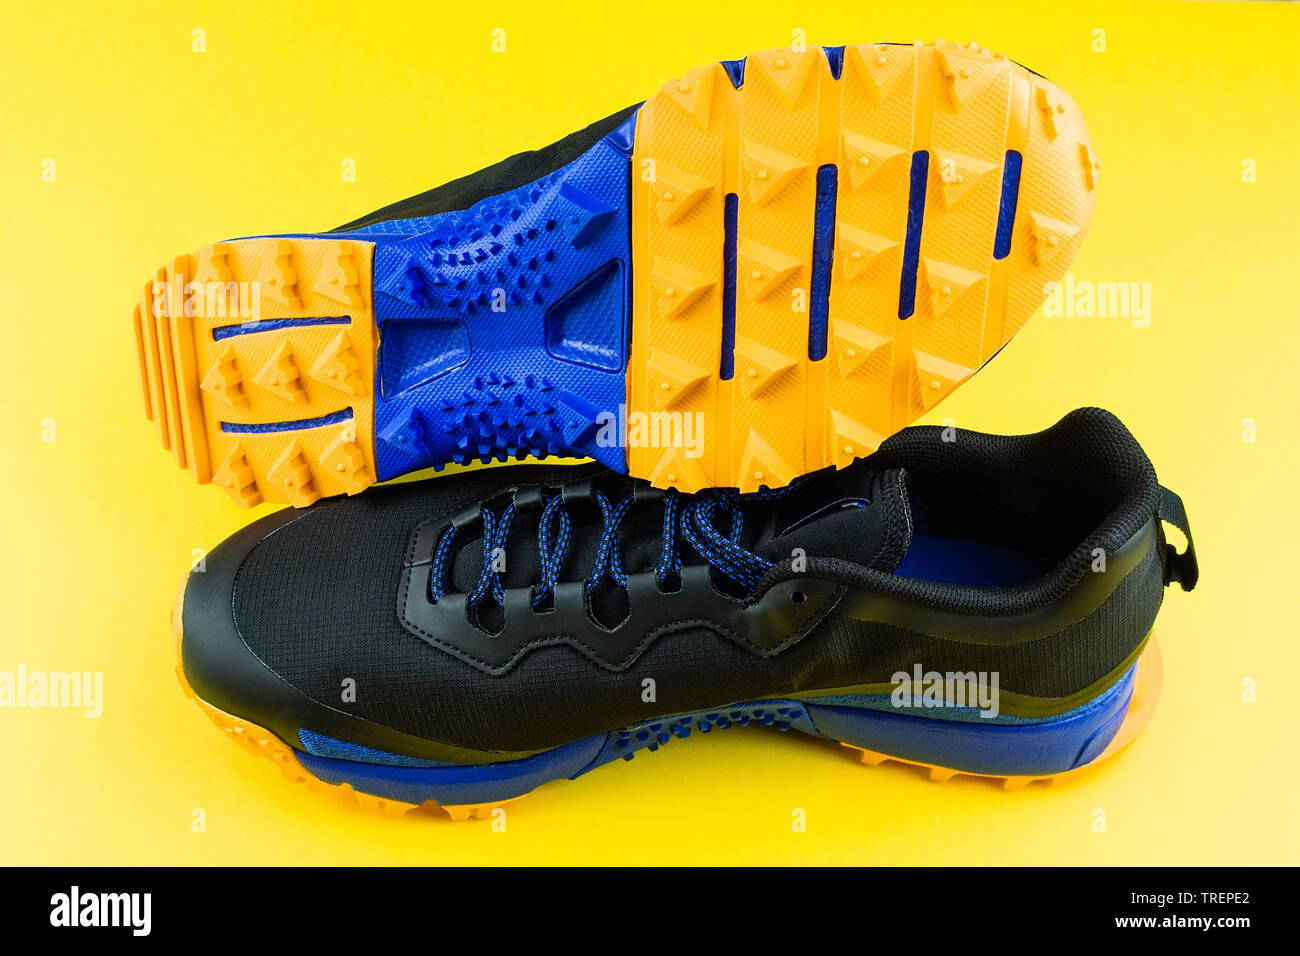 black sneaker with orange insert, mesh fabric, on a yellow background, running and fitness sneakers on yellow background Stock Photo